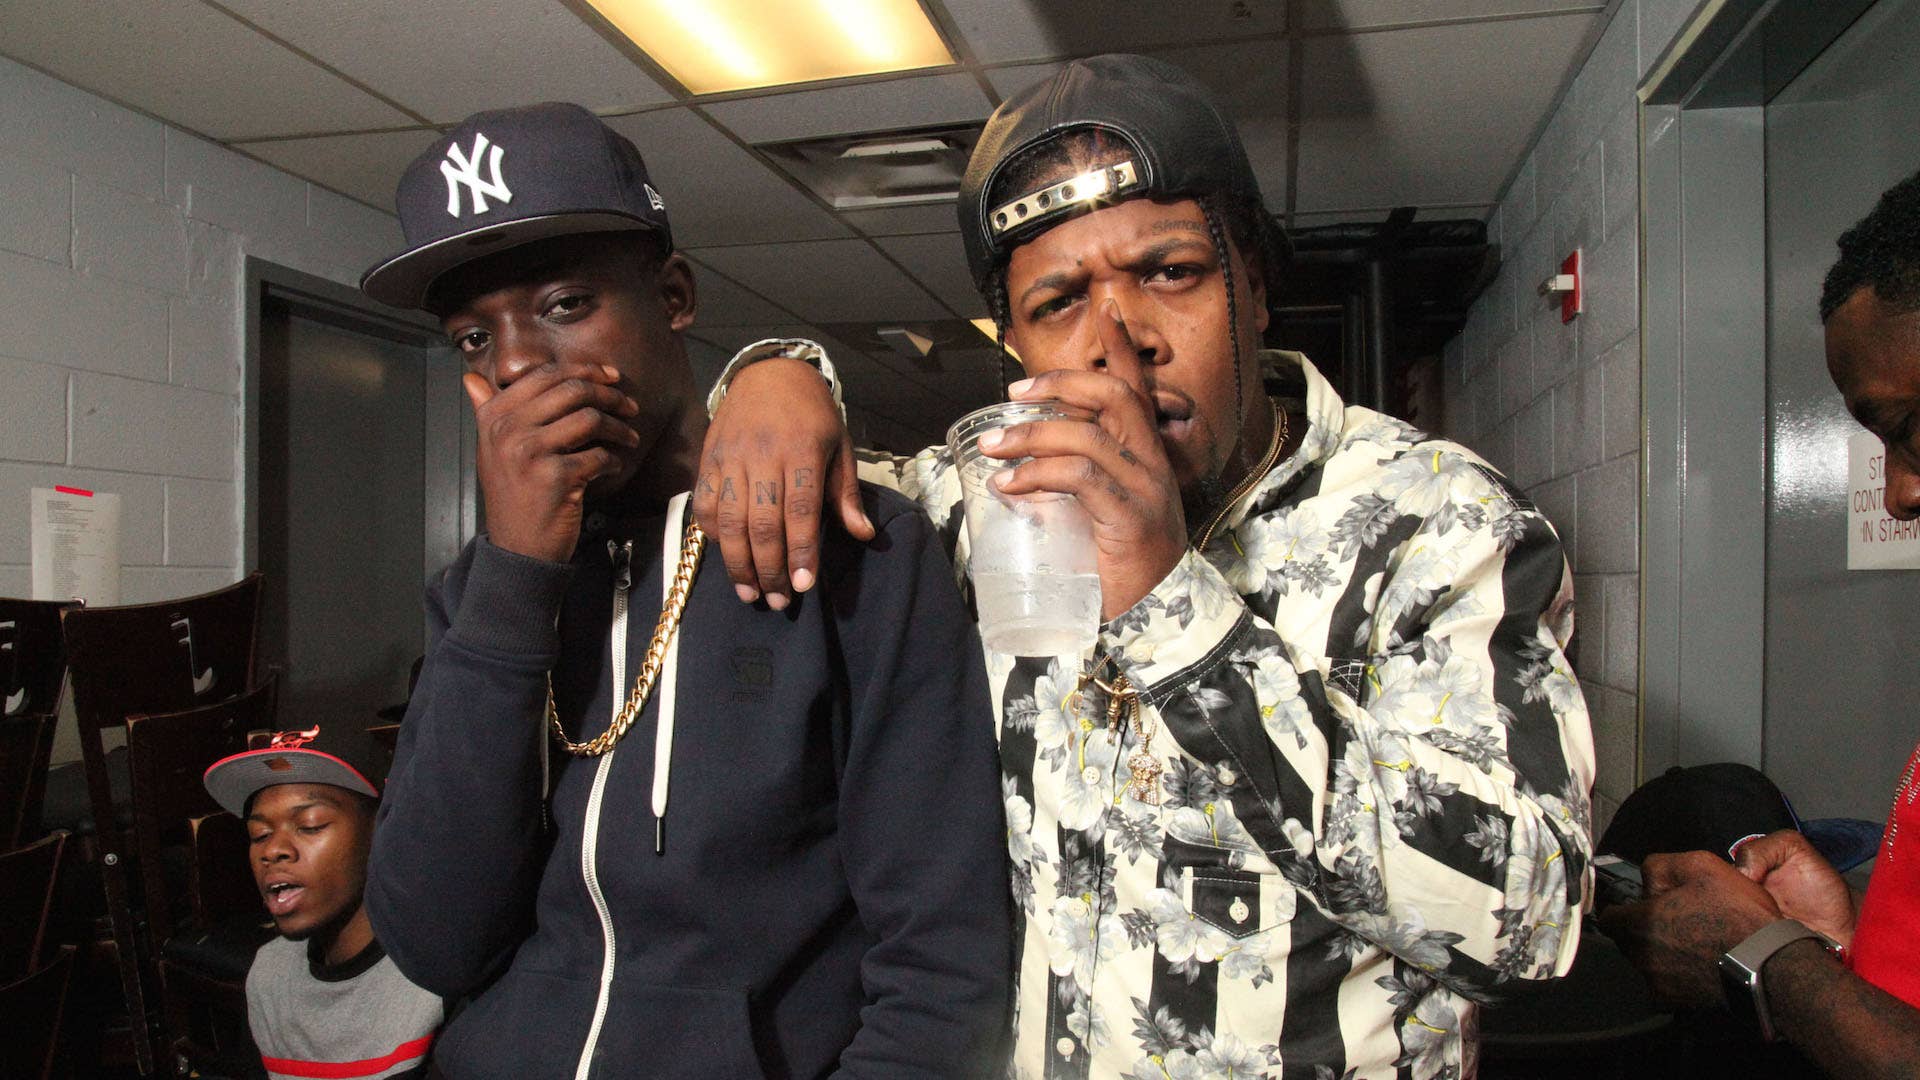 Bobby Shmurda and Rowdy Rebel attend Fab in Concert at BB King Blues Club & Grill